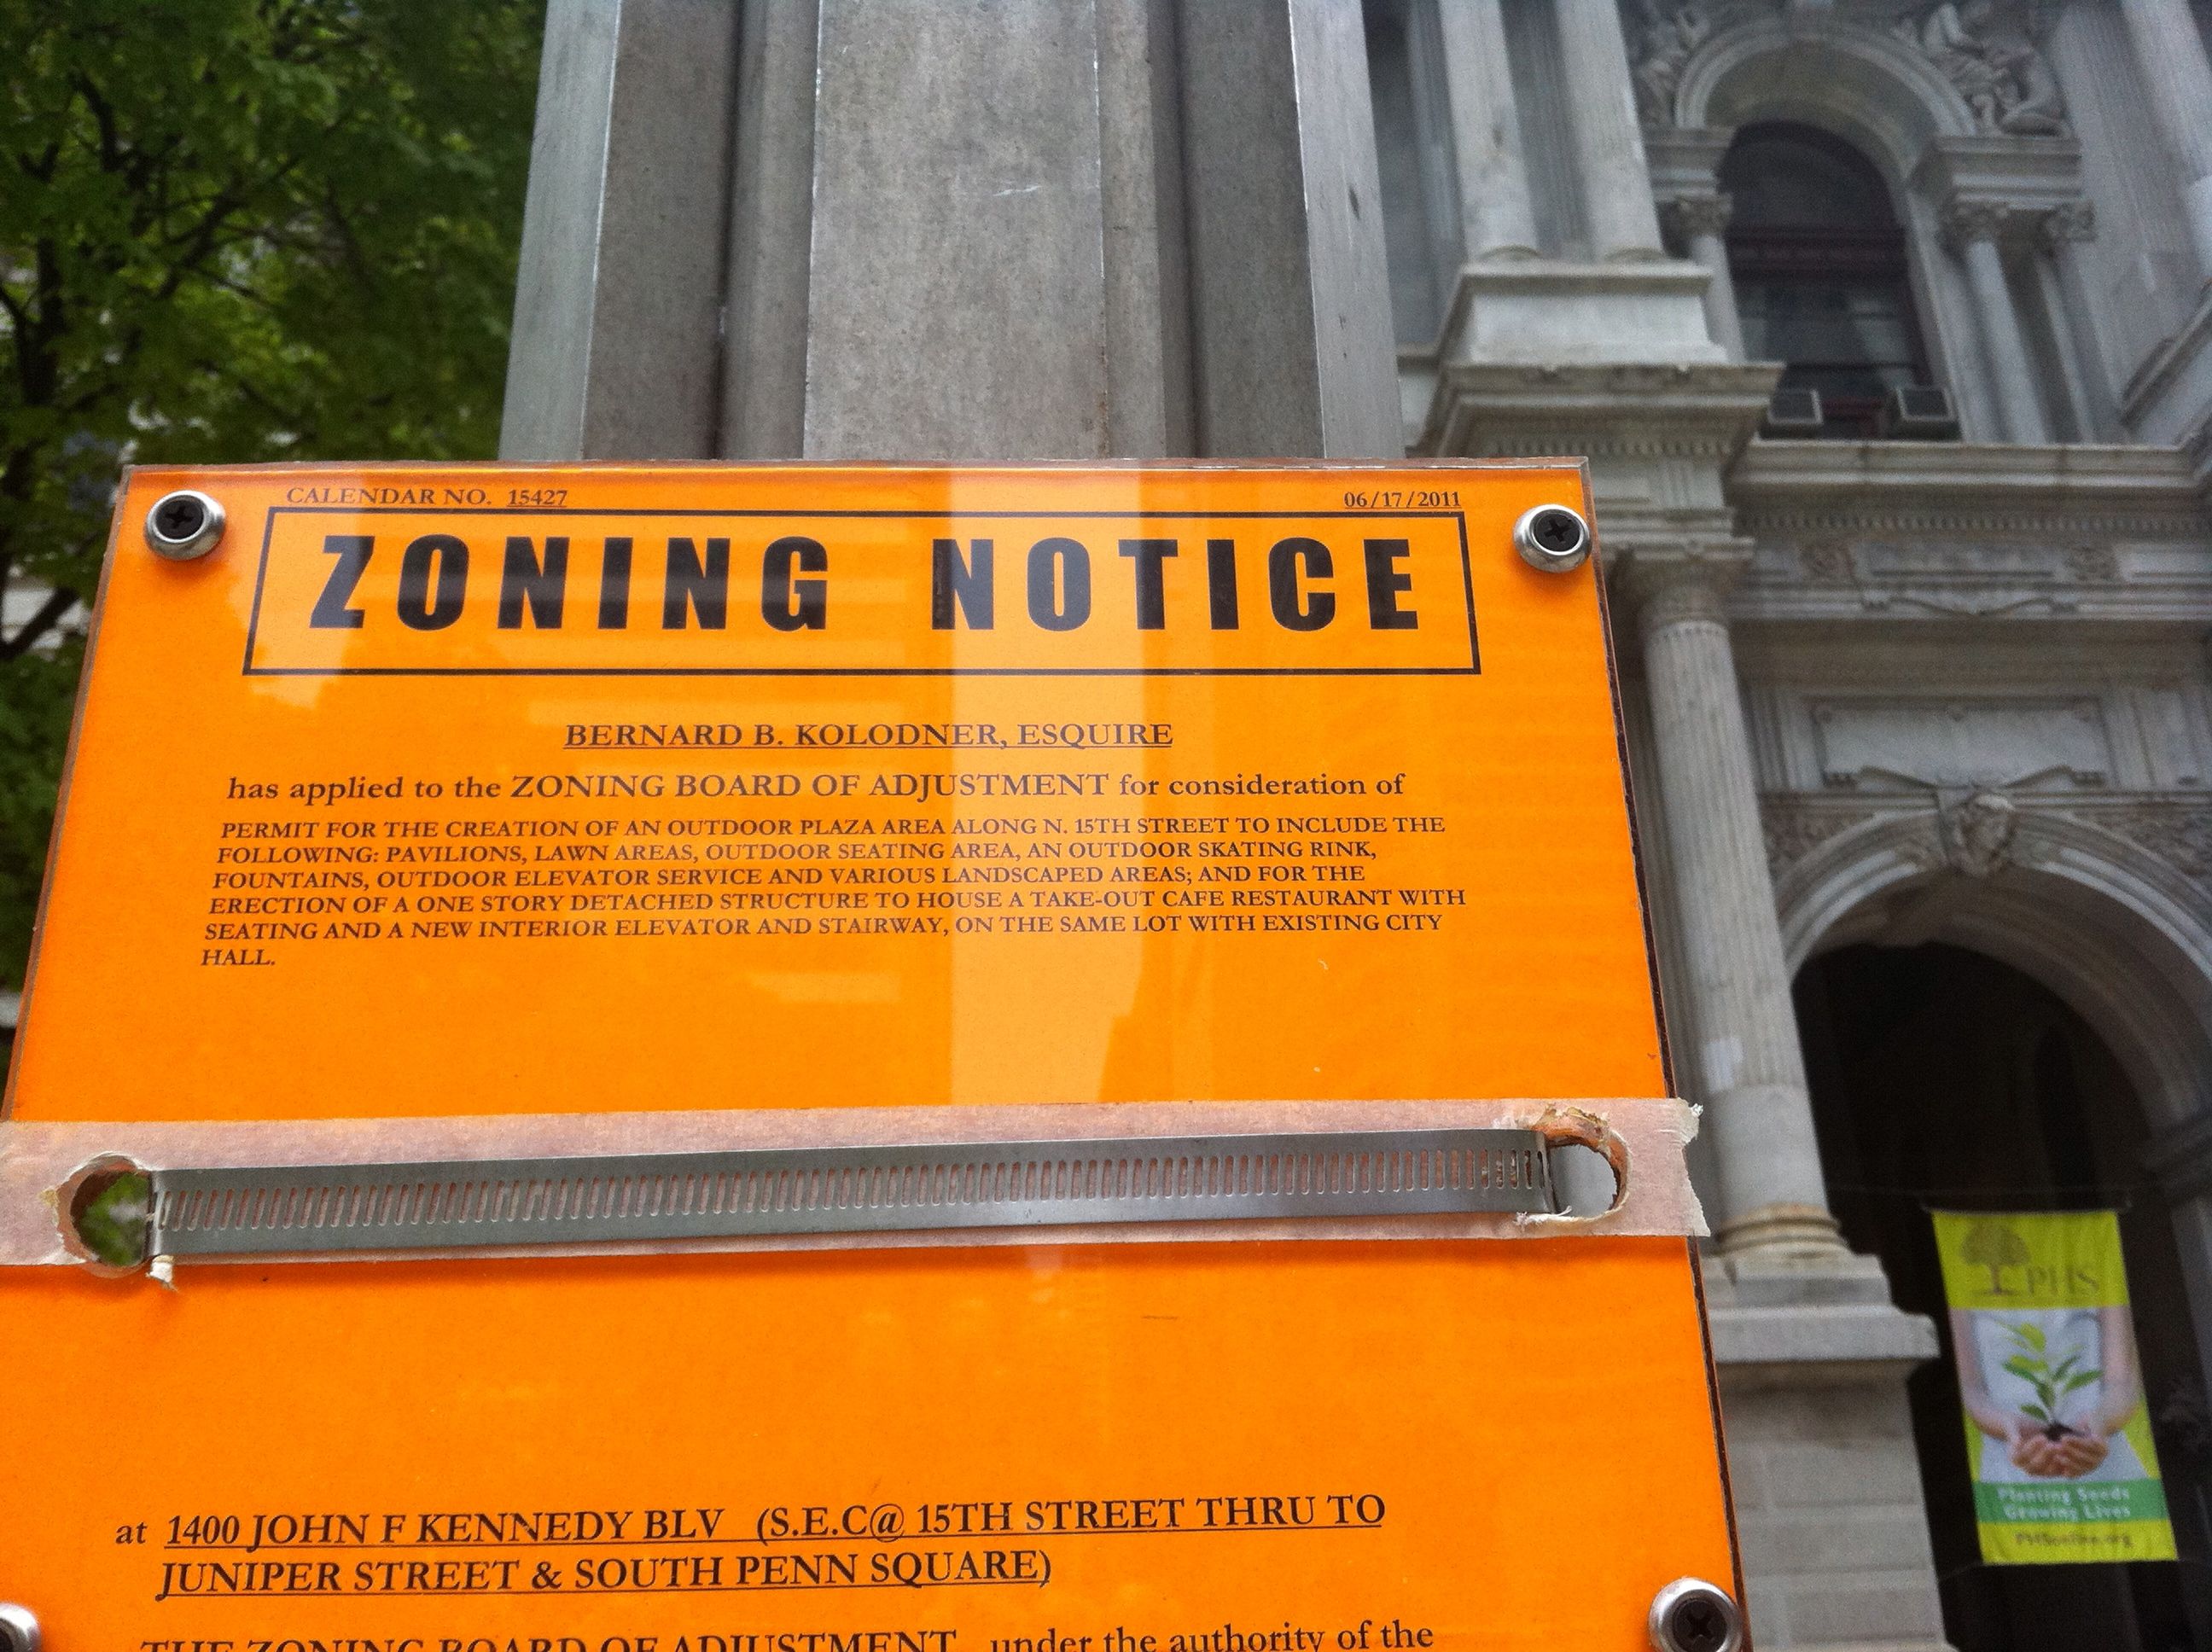 Zoning notice for Dilworth Plaza